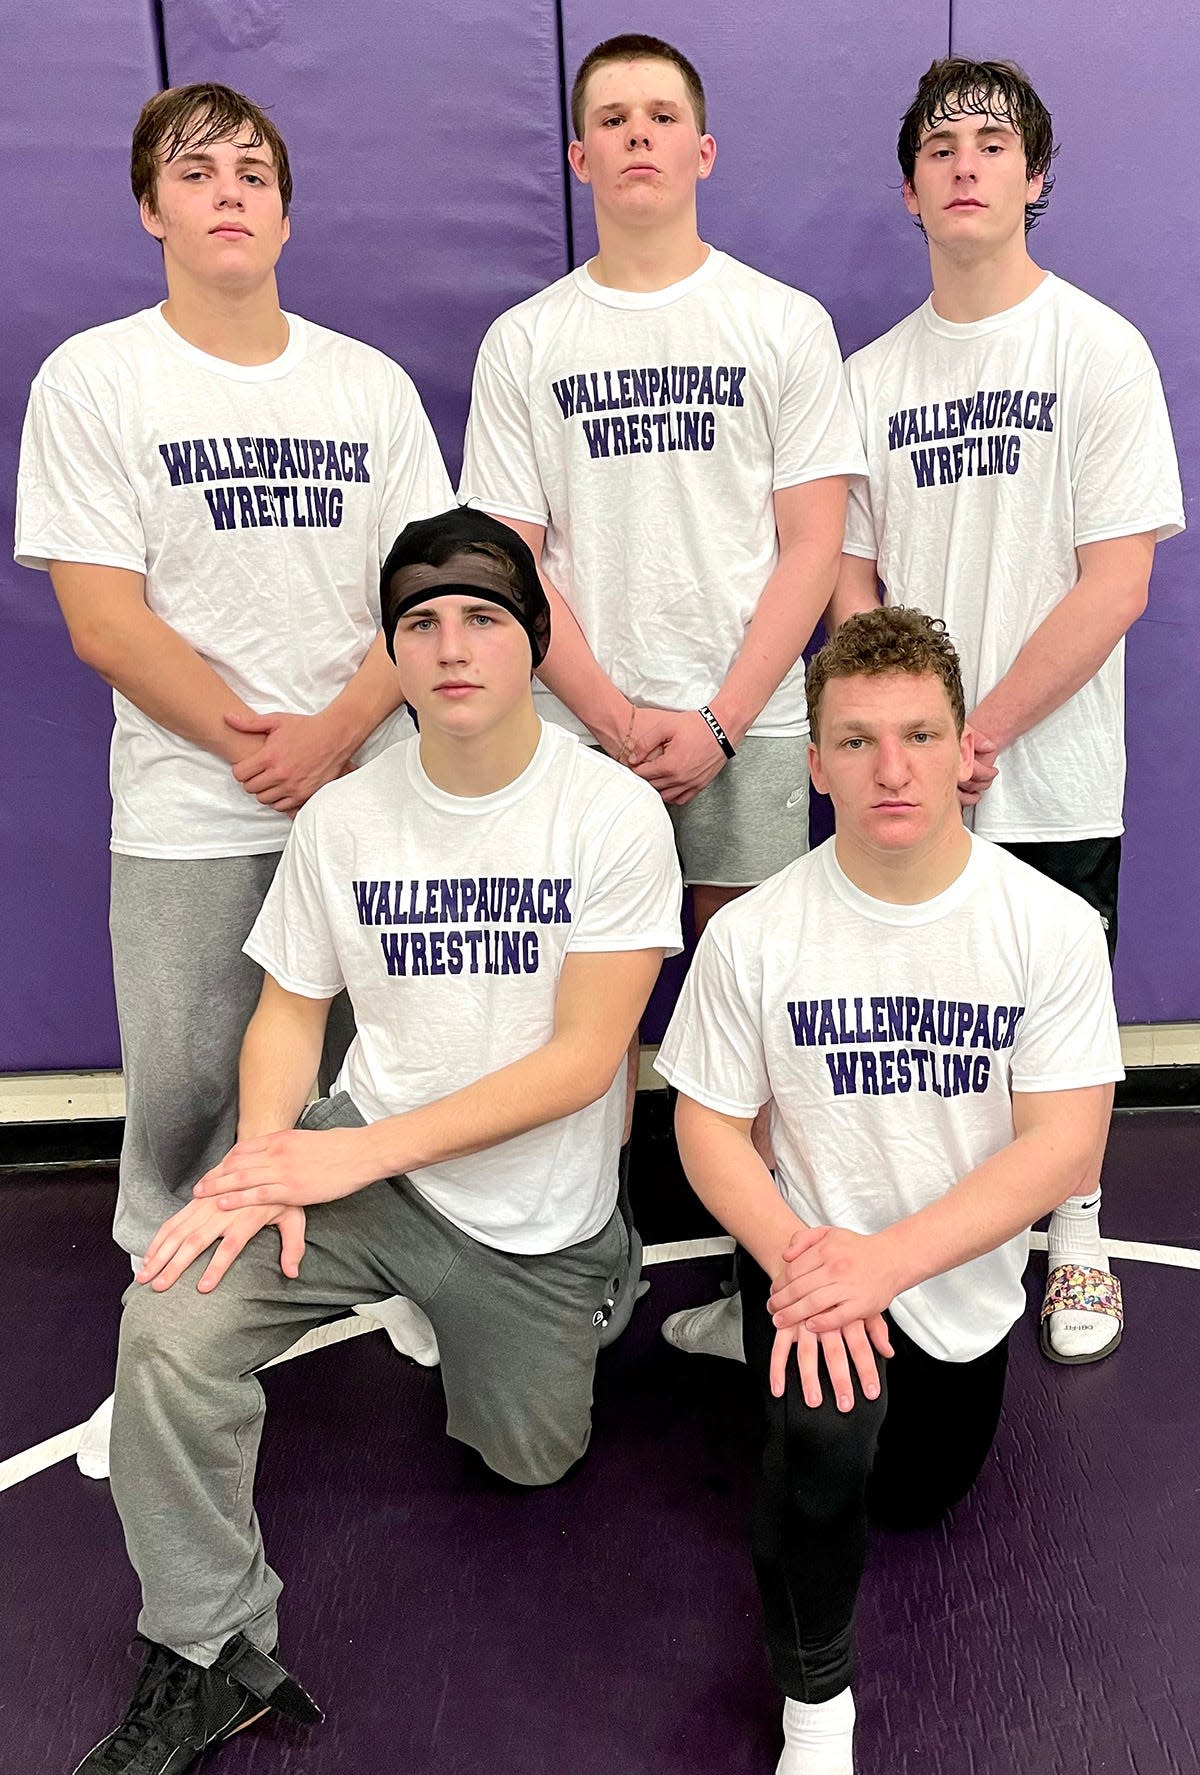 Wallenpaupack Area's varsity wrestling line-up will feature five returners who qualified for last year's Northeast Regional Tournament. Pictured here are (kneeling, from left): Gunnar Myers, Jaden Colwell. Standing are: Conan Kier, Xaiden Schock, Henry Baronowski.